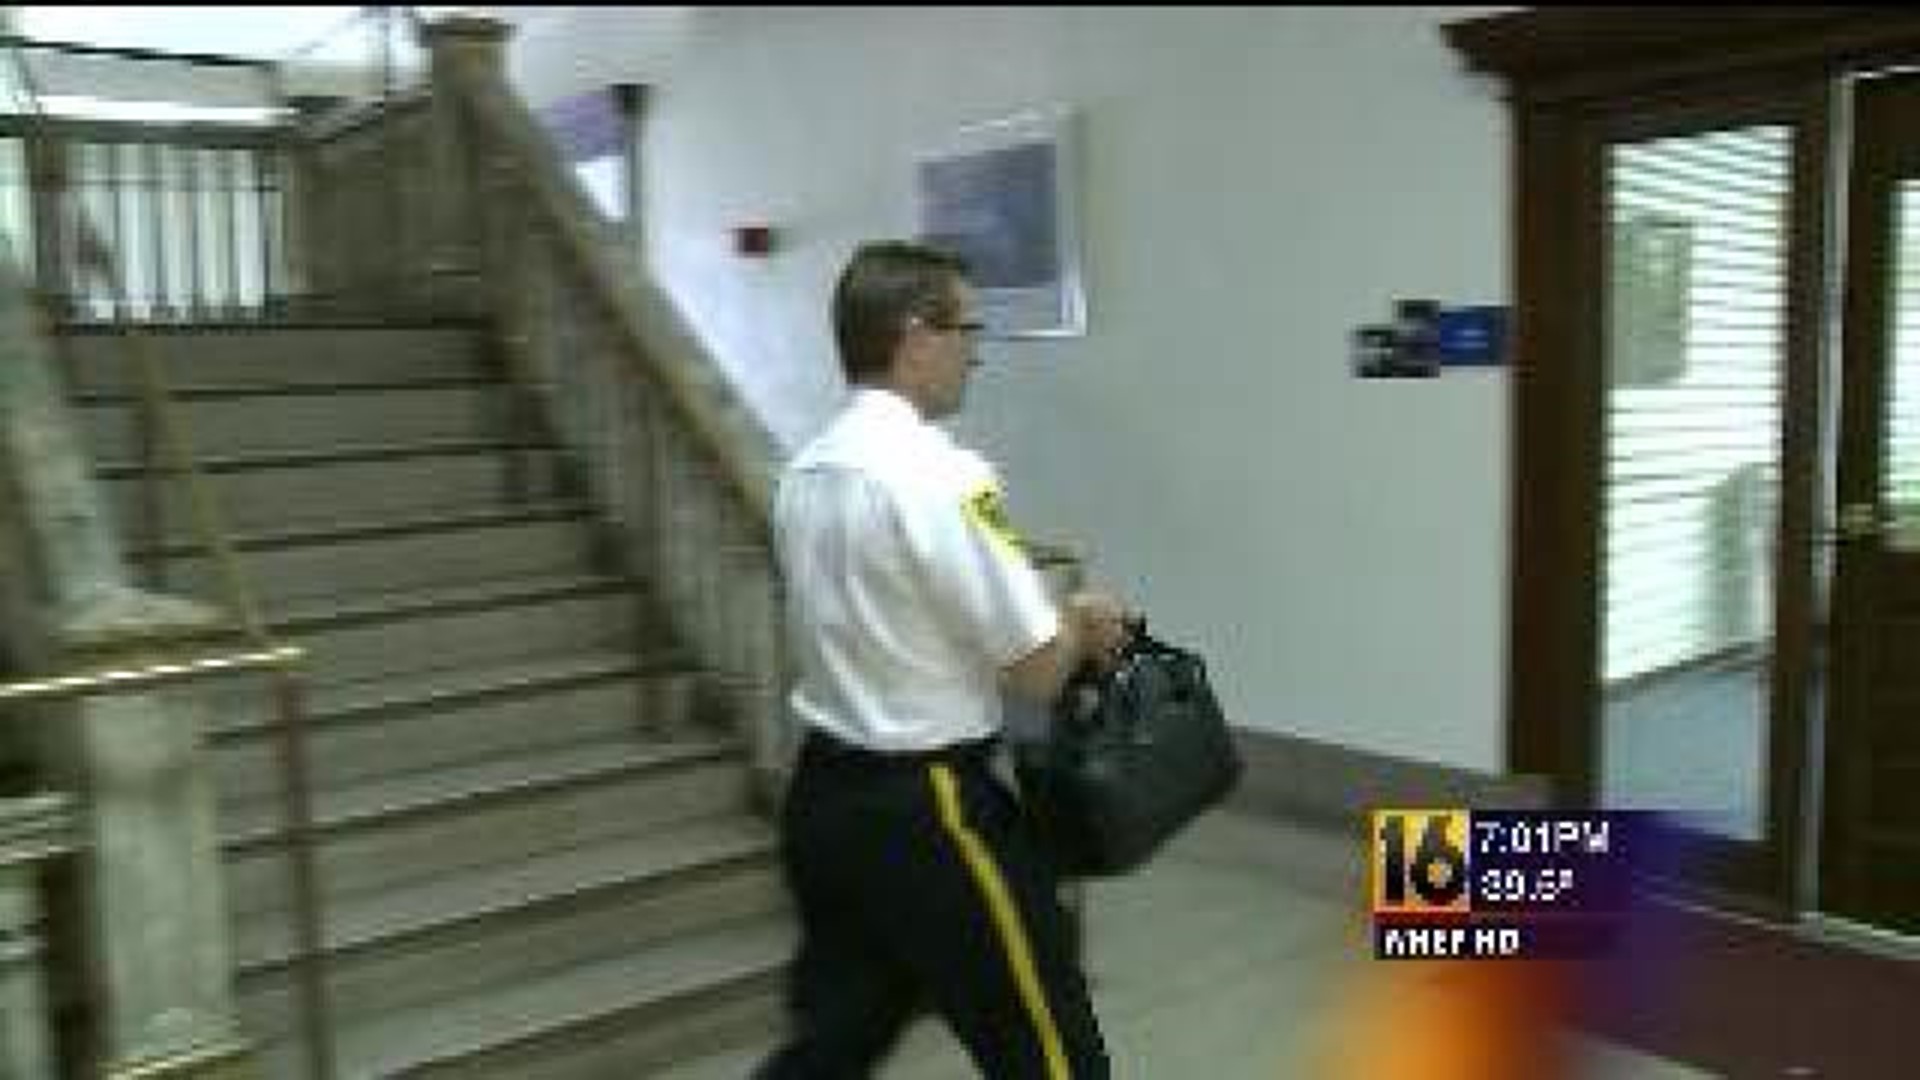 Judge: Police Chief Not Guilty